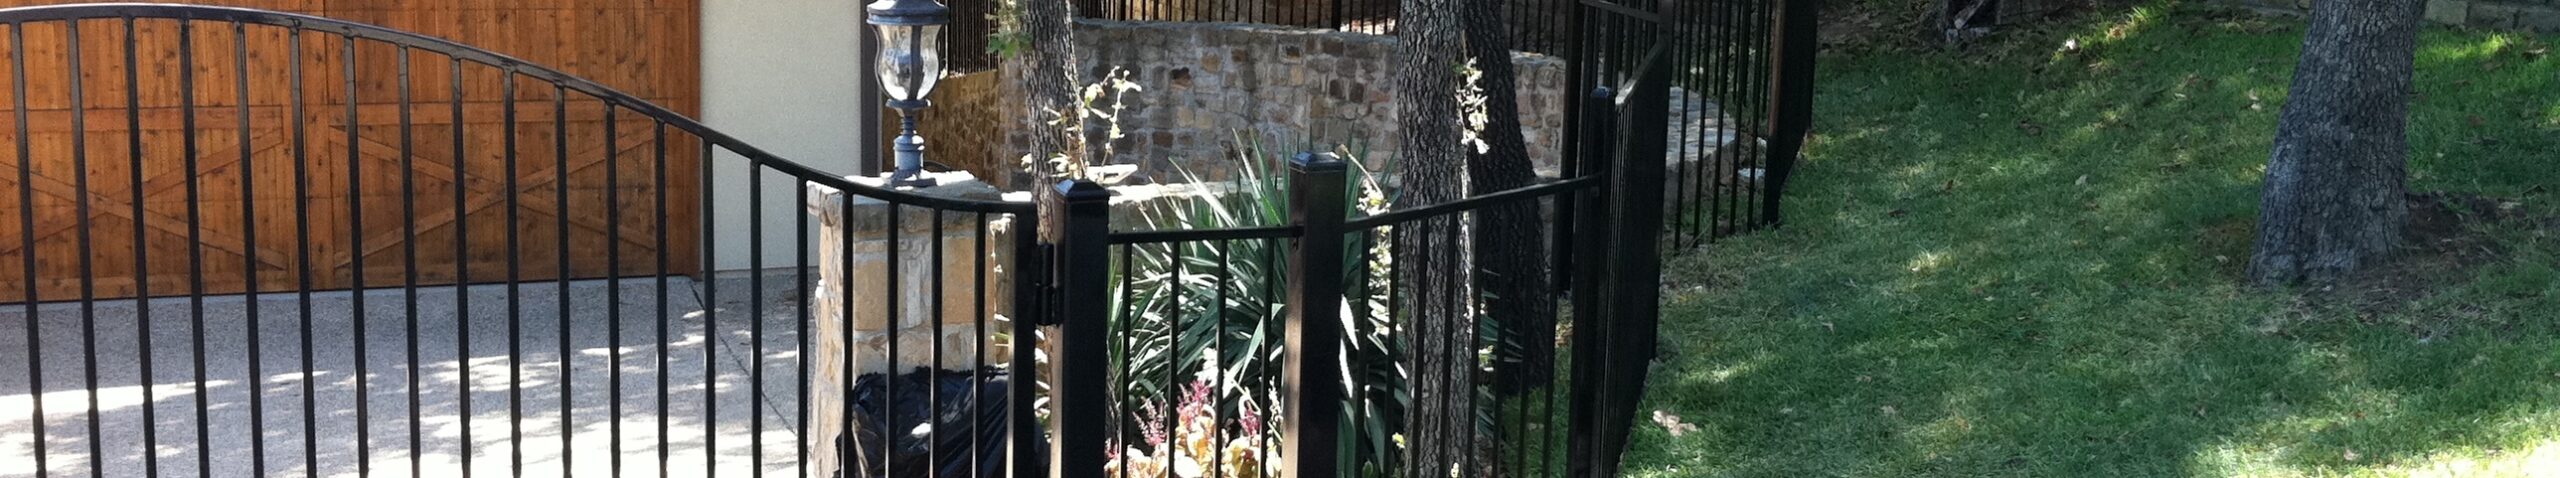 Steel and Iron Fence Company Repair and Installation Dallas Fort Worth Area